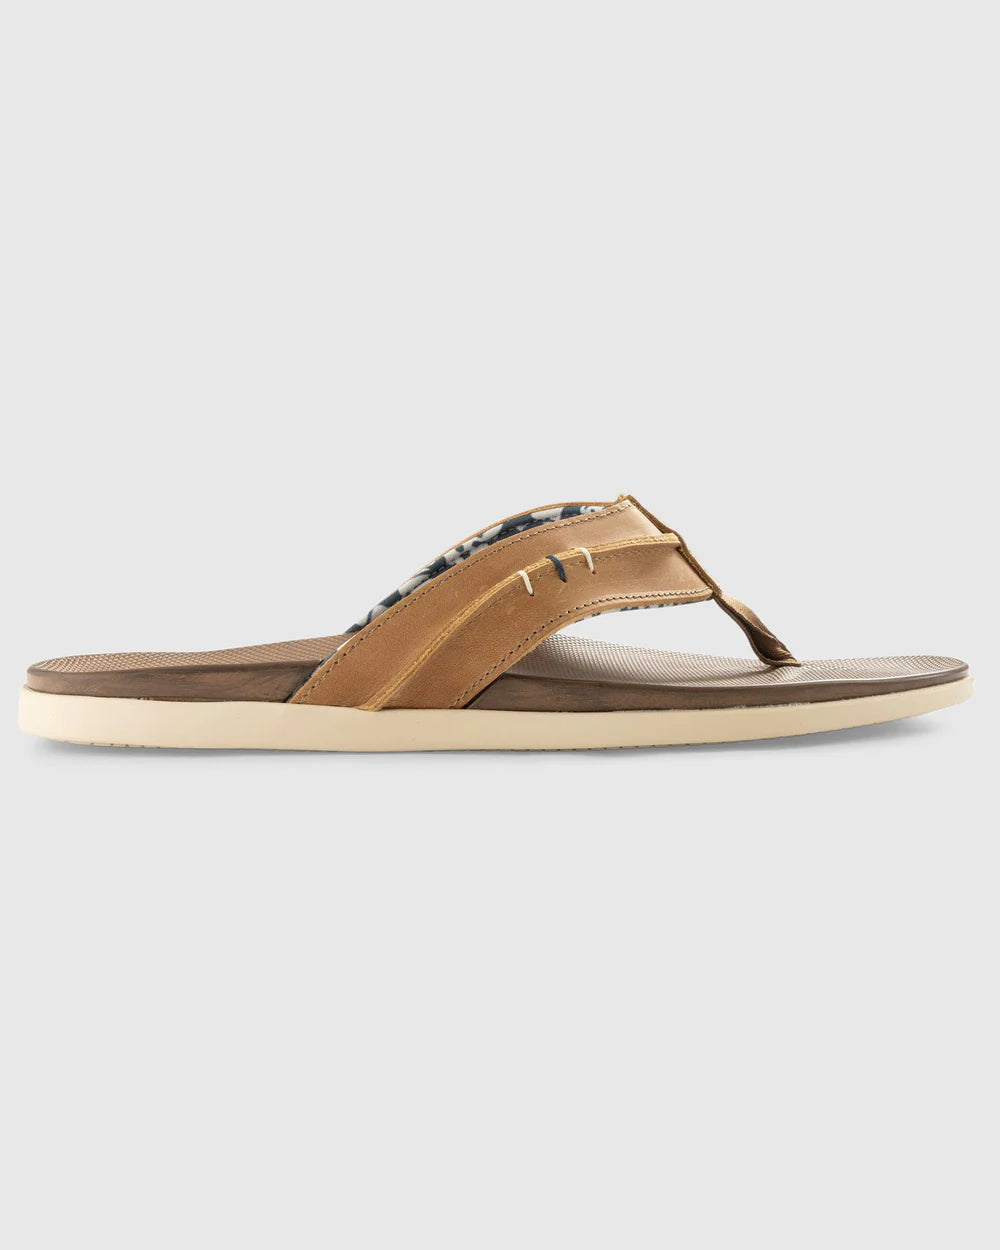 Johnnie-O - Starboard Sandal - Taupe